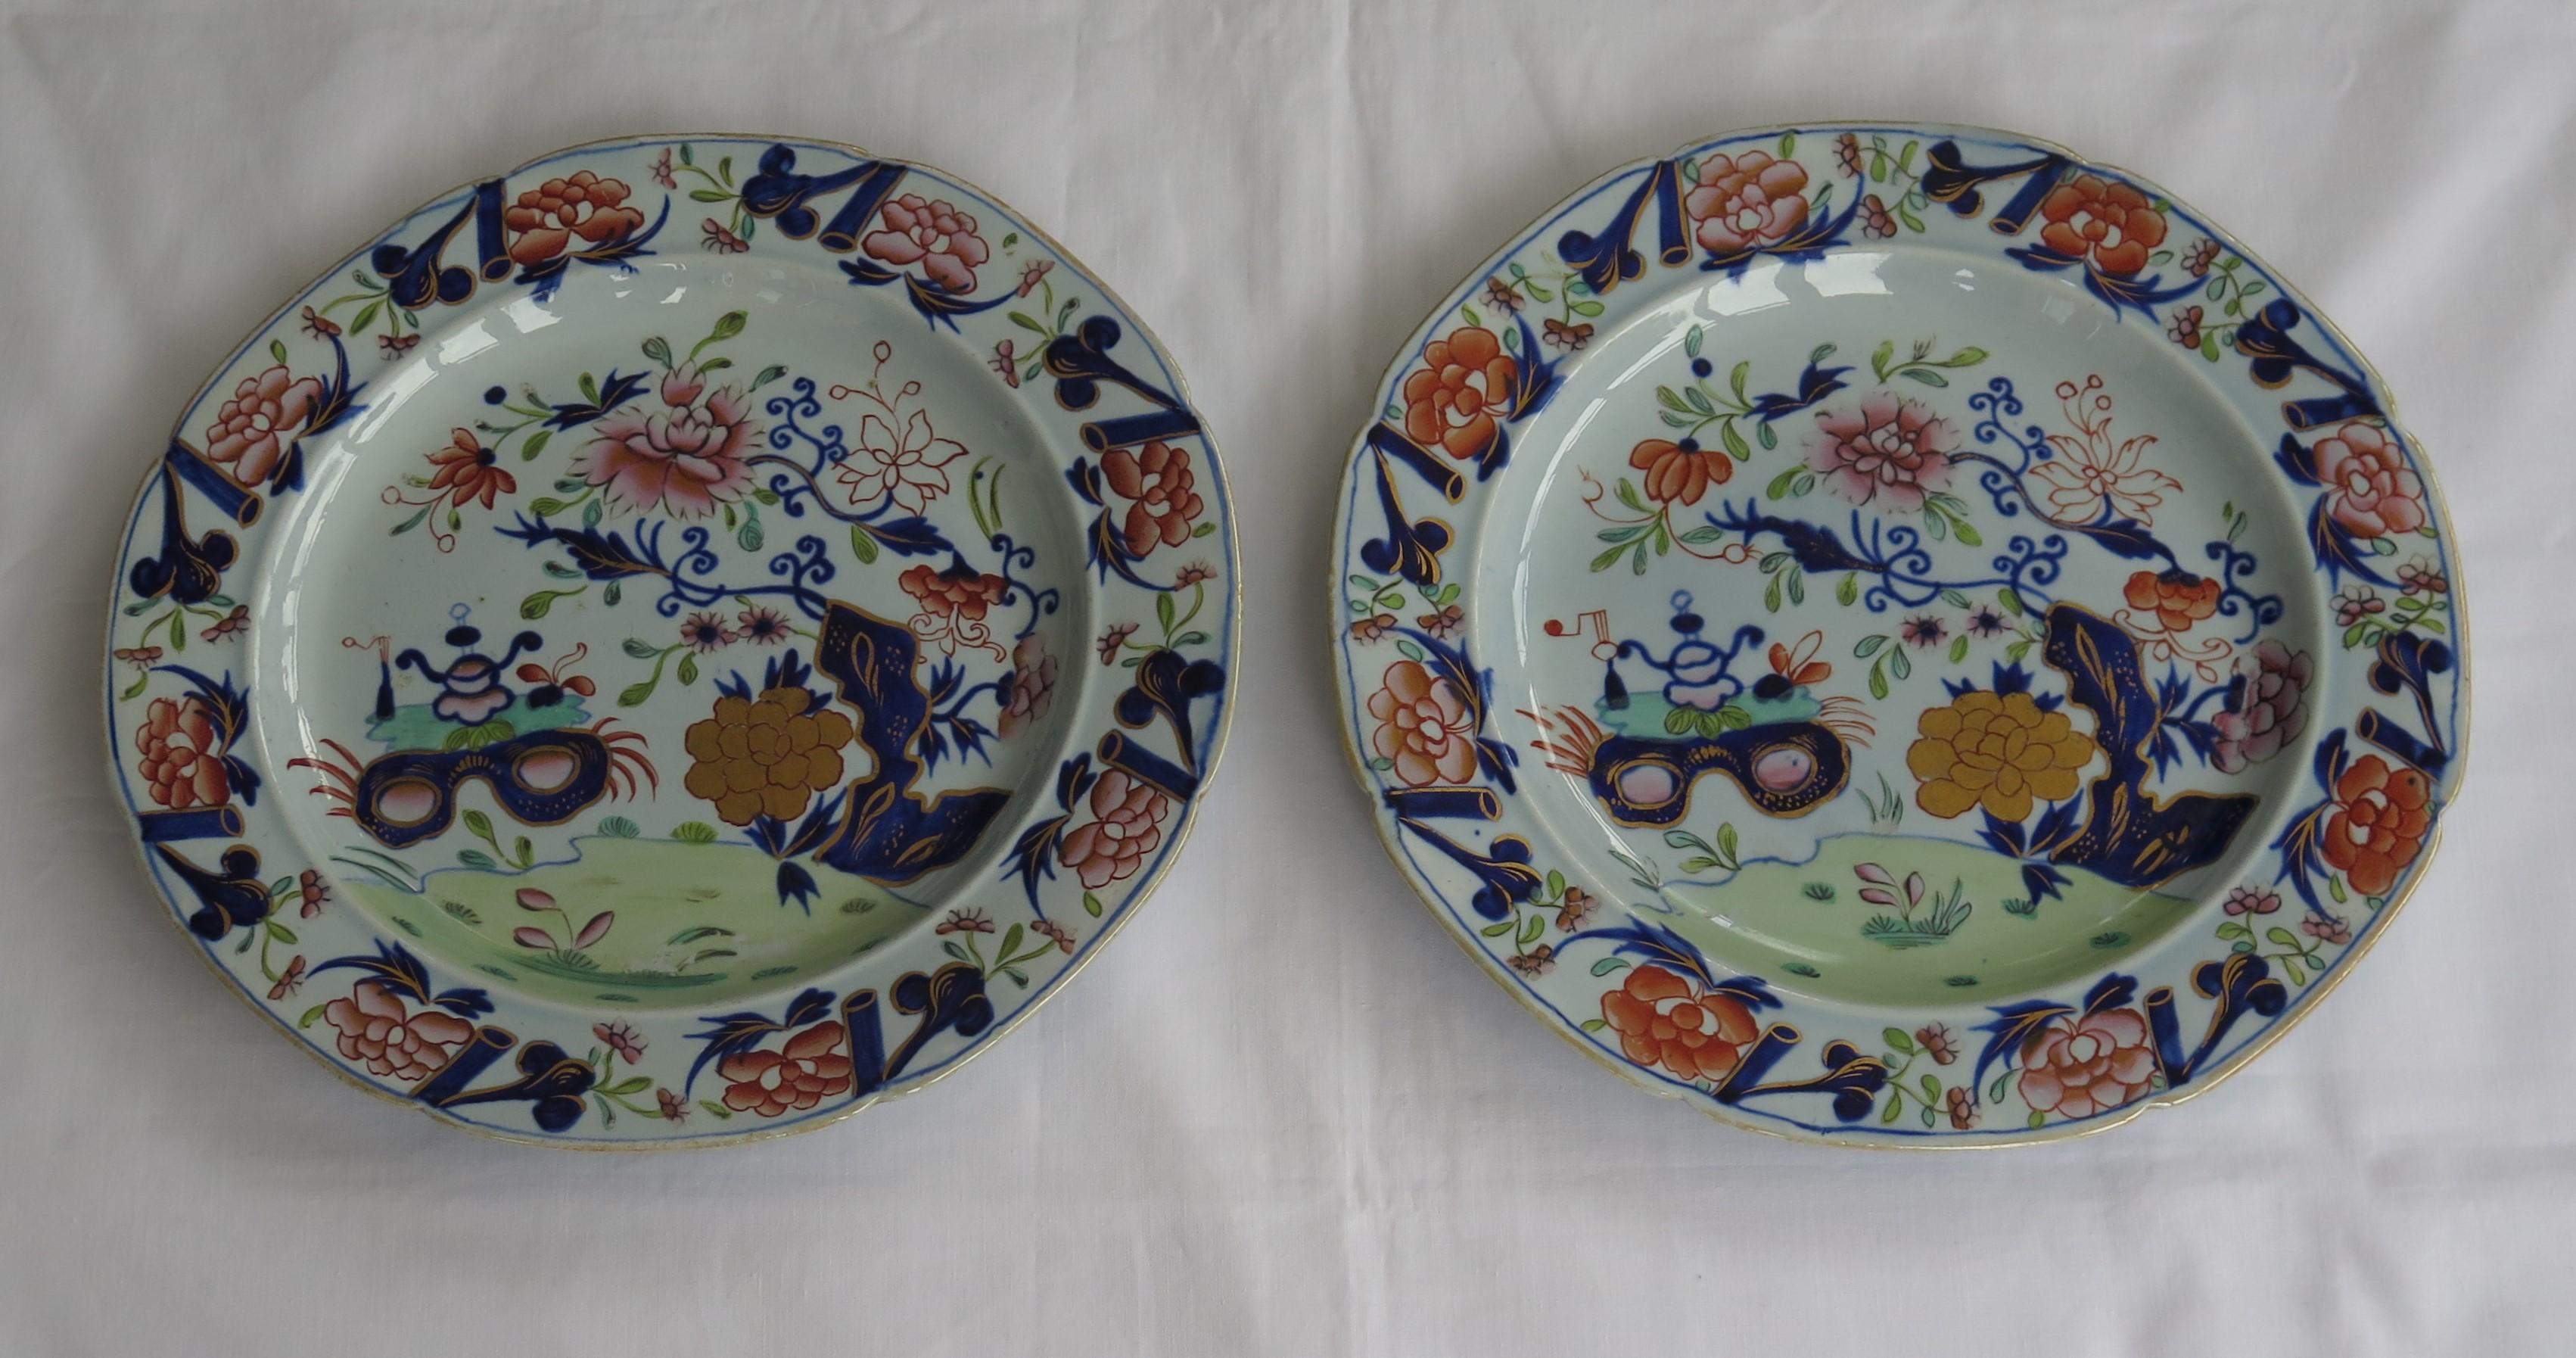 These are a fine pair of ironstone pottery dinner plates made by the Mason's factory at Lane Delph, Staffordshire, England and beautifully decorated in the small vase, flowers and rocks pattern, fully stamped and dating to the earliest period of